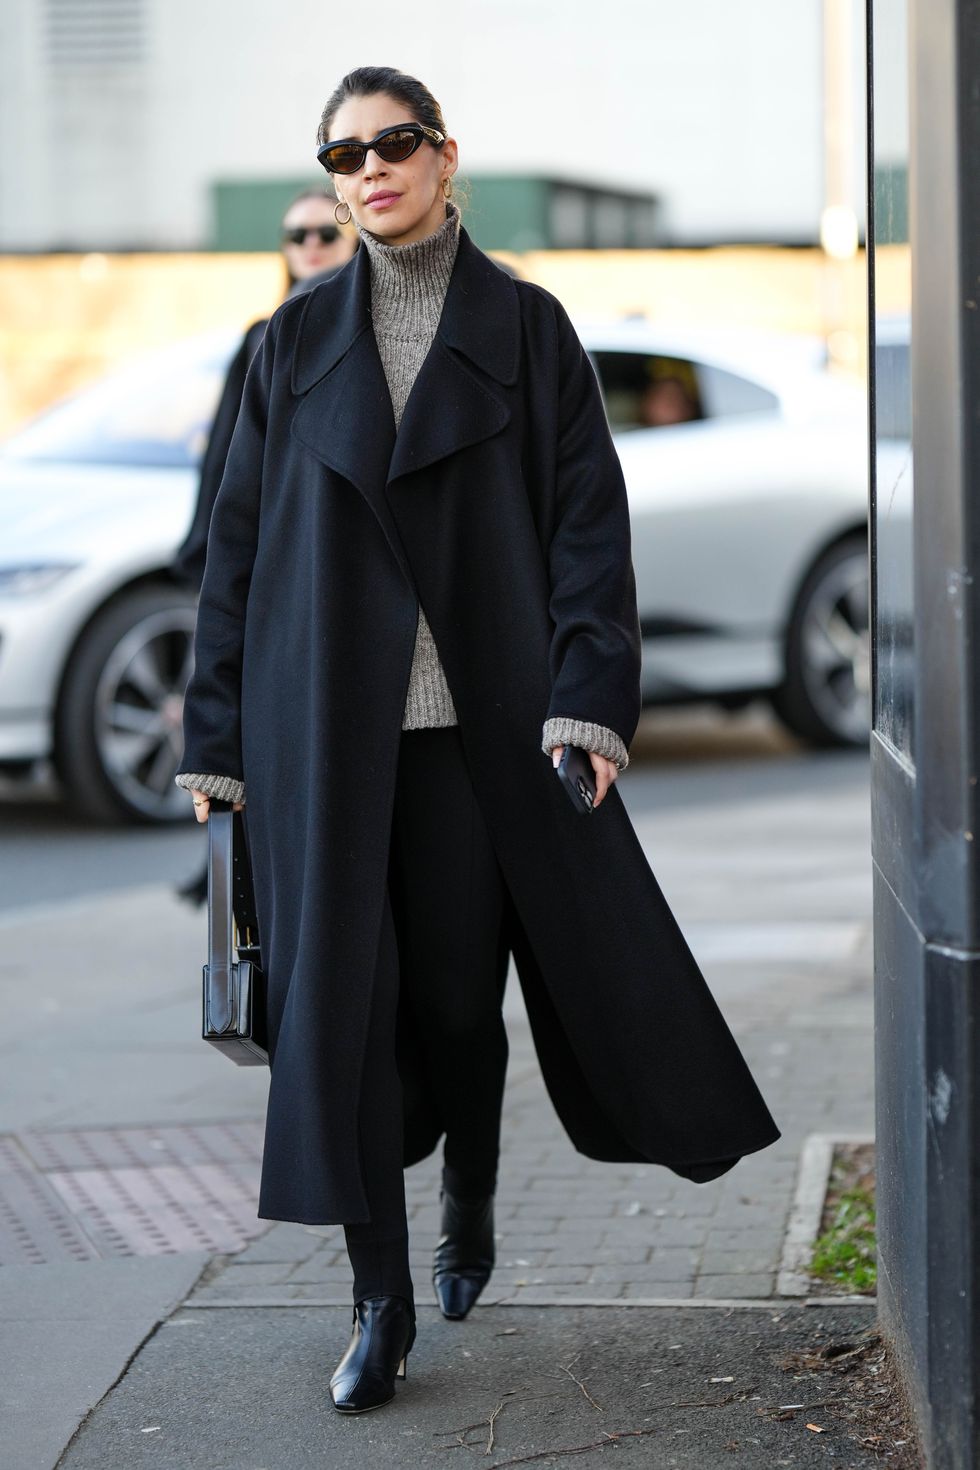 london, england february 19 a guest wears black sunglasses, gold earrings, a gray wool ribbed turtleneck pullover, a black long coat, black legging pants, a black shiny leather handbag, black shiny leather heels ankle shoes , outside nensi dojaka, during london fashion week february 2023 on february 19, 2023 in london, england photo by edward berthelotgetty images